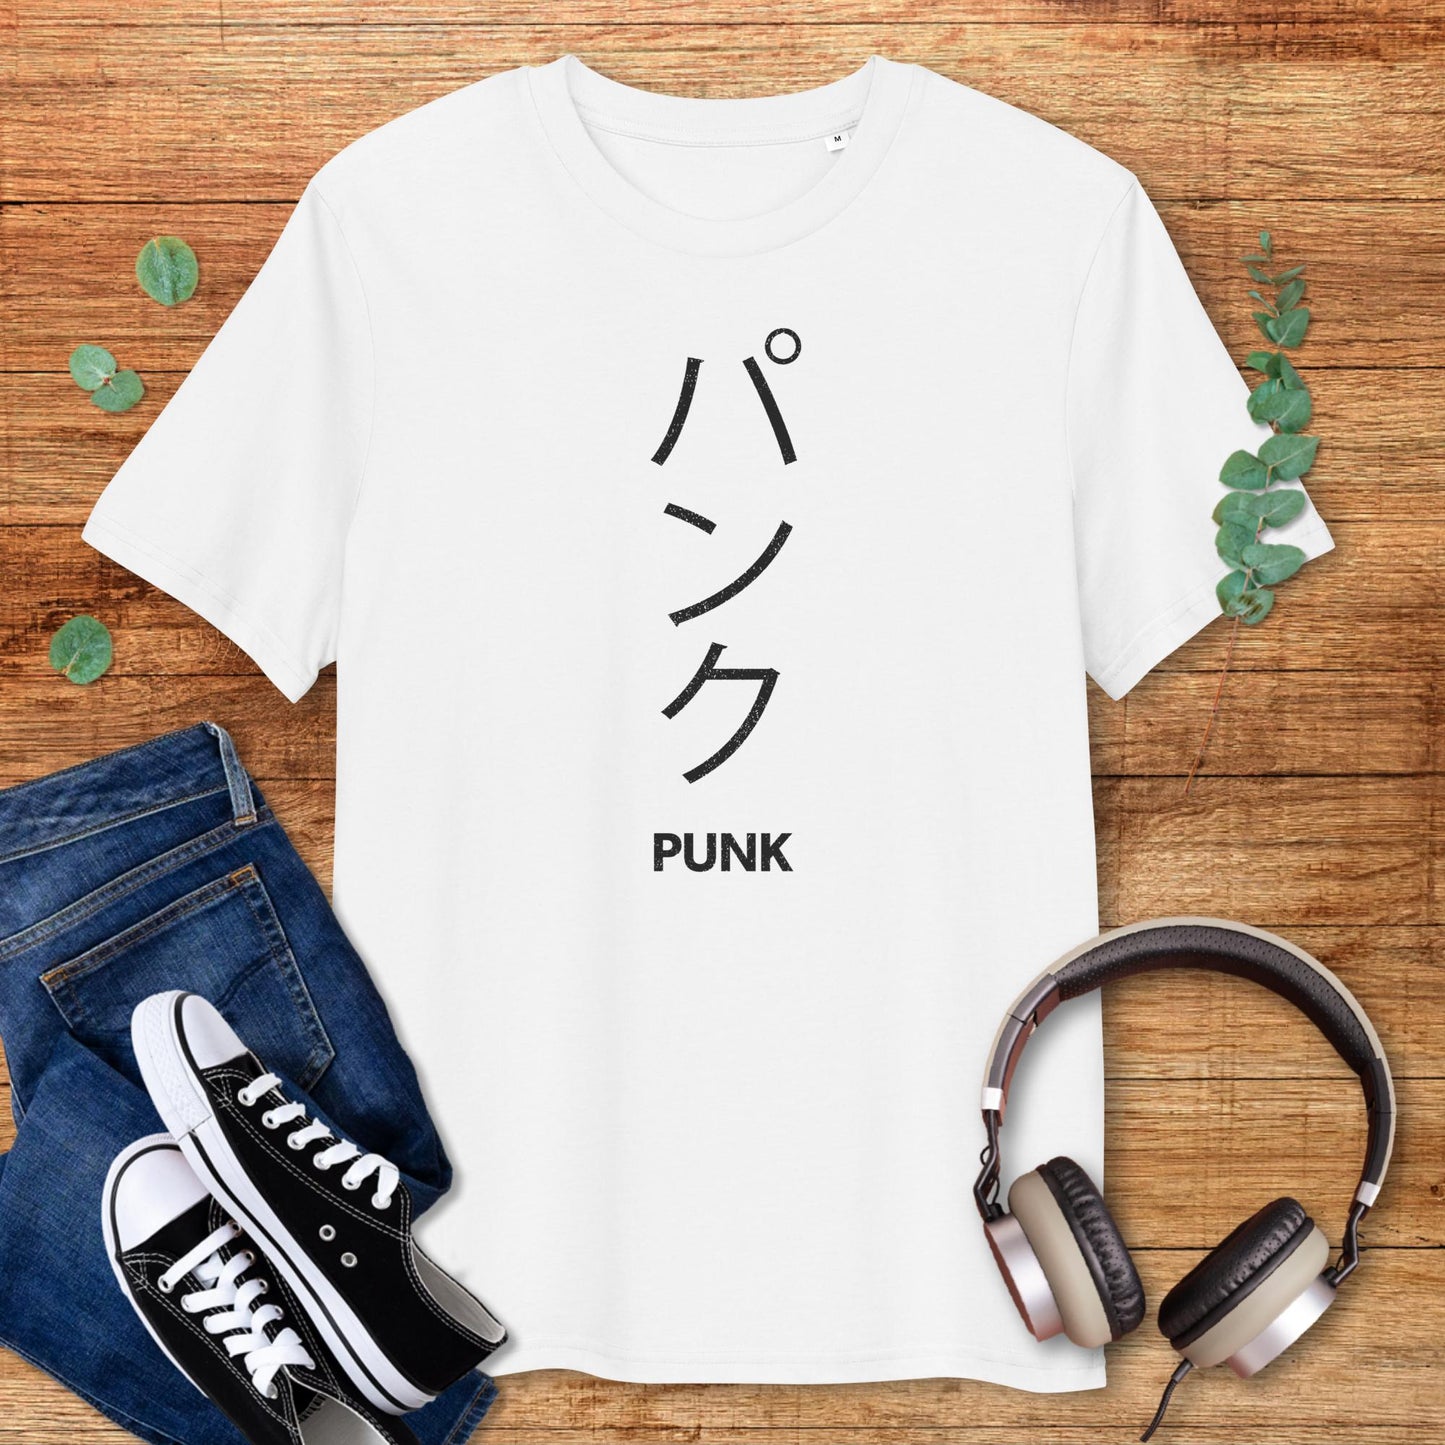 Punk in Japanese